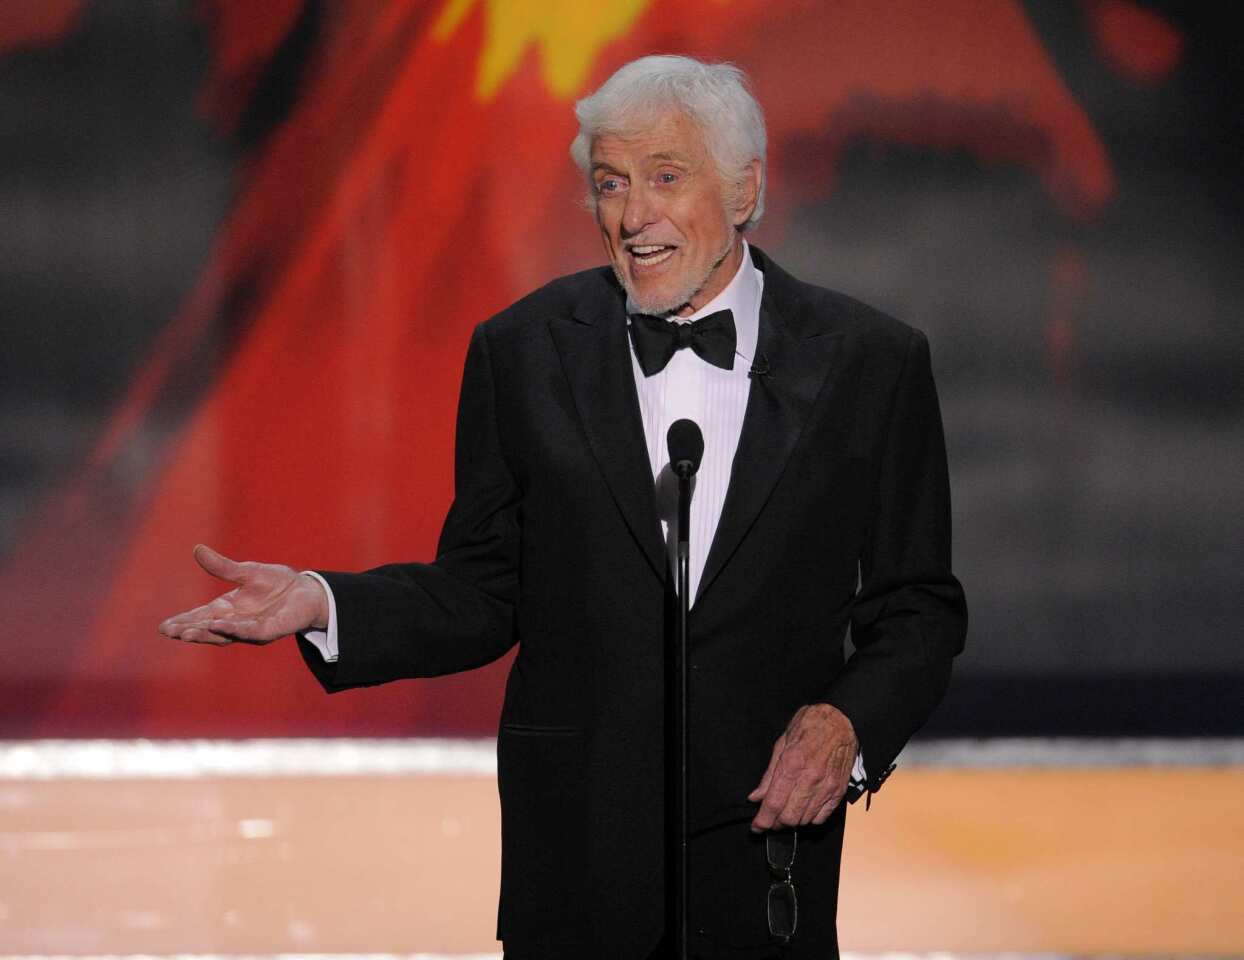 The faces may get younger, but they still love Dick Van Dyke